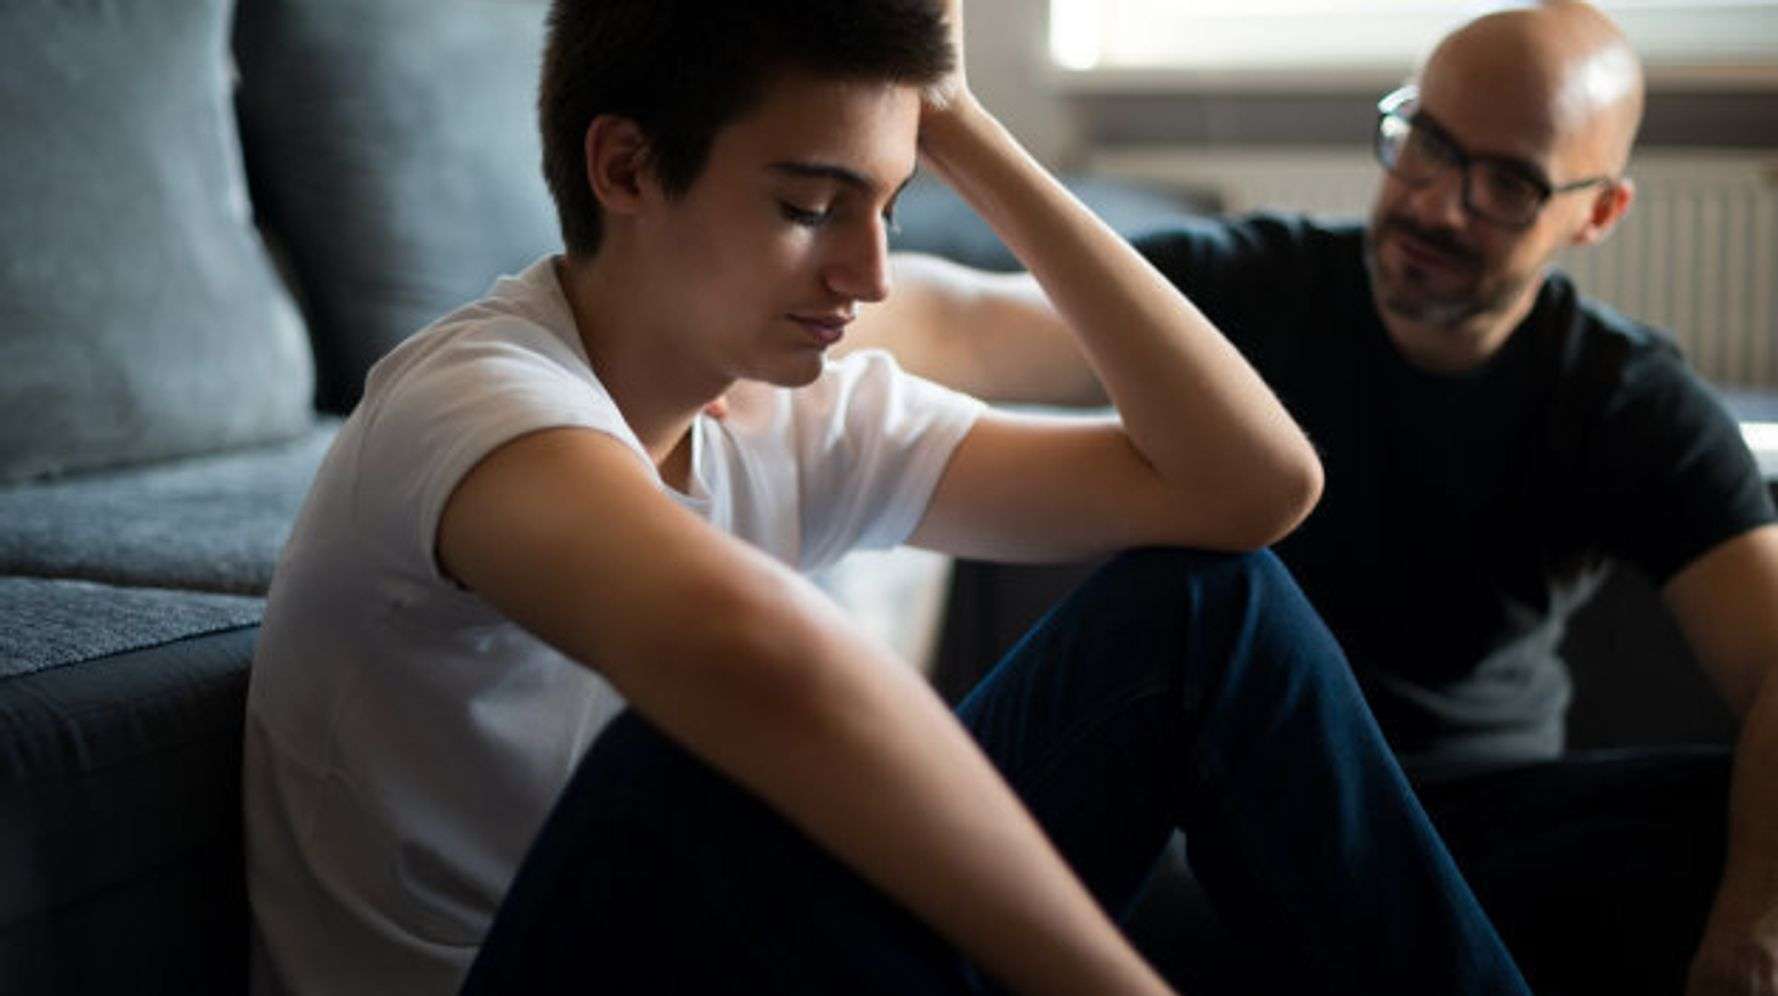 Treating Teen Depression Helps Parents